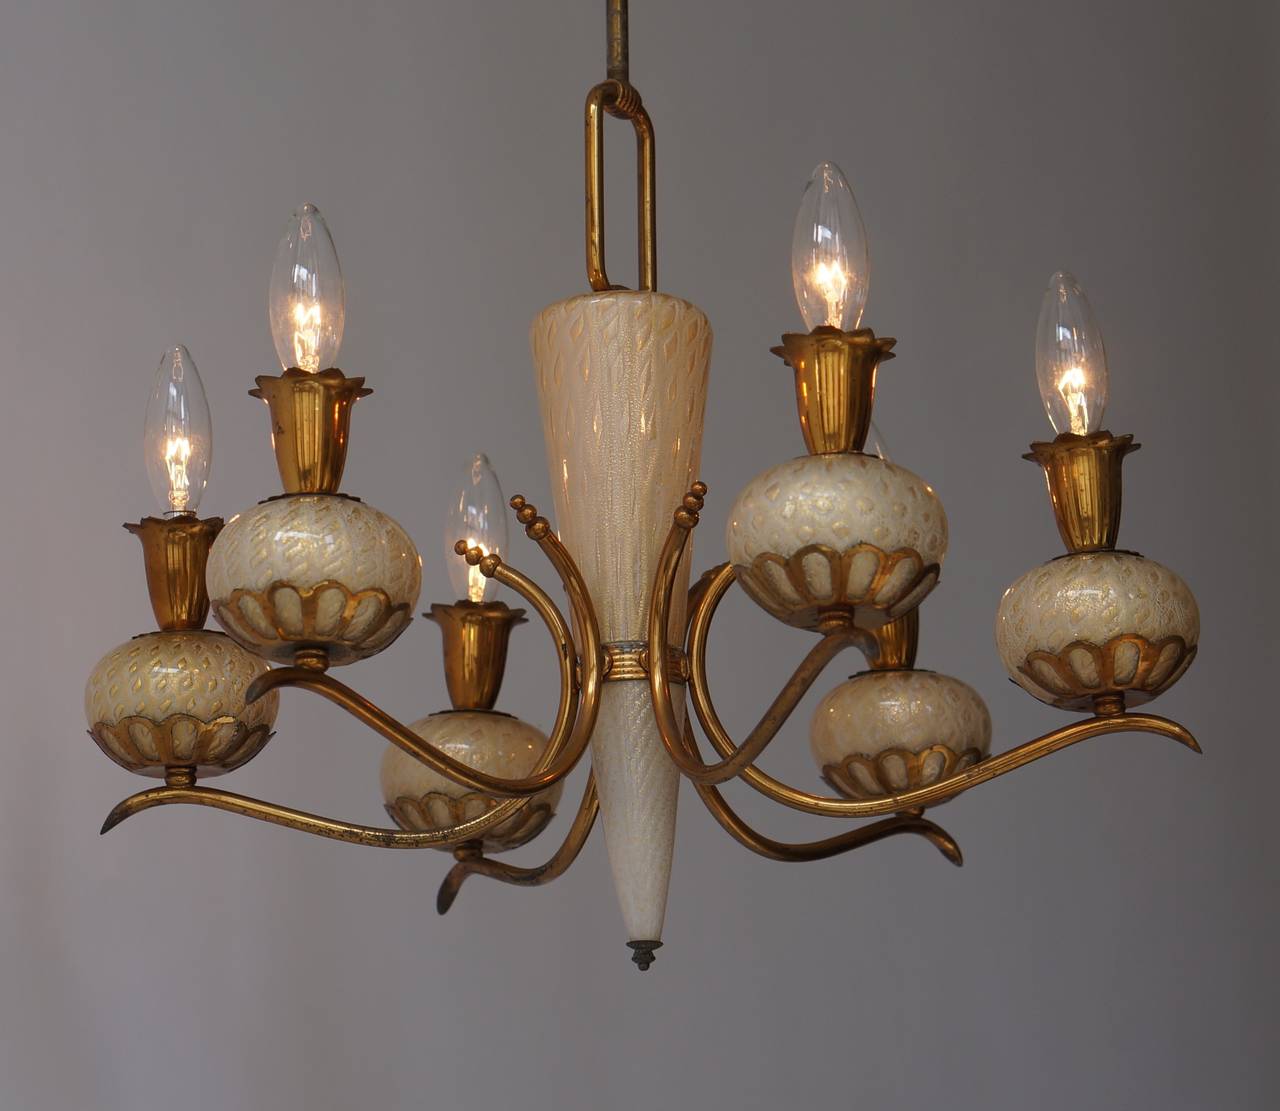 20th Century Elegant Italian Murano Gold Glass and Brass Chandelier by Barovier & Torso For Sale